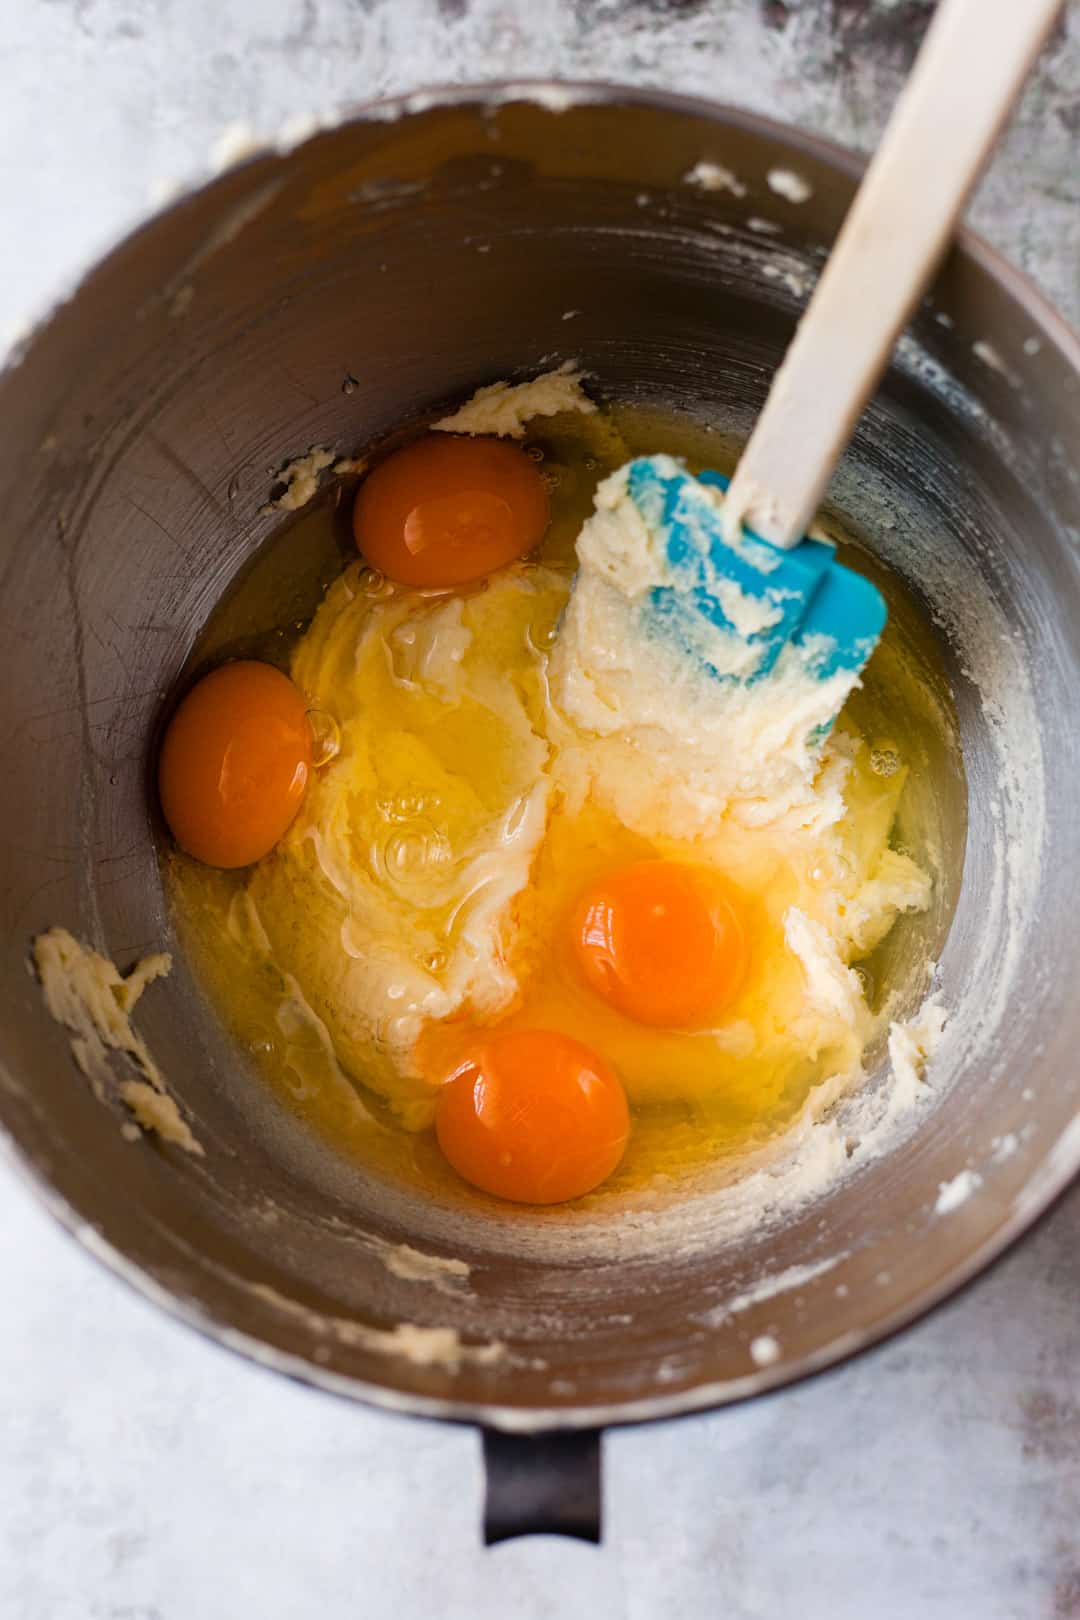 Eggs are whisked into the cake batter.